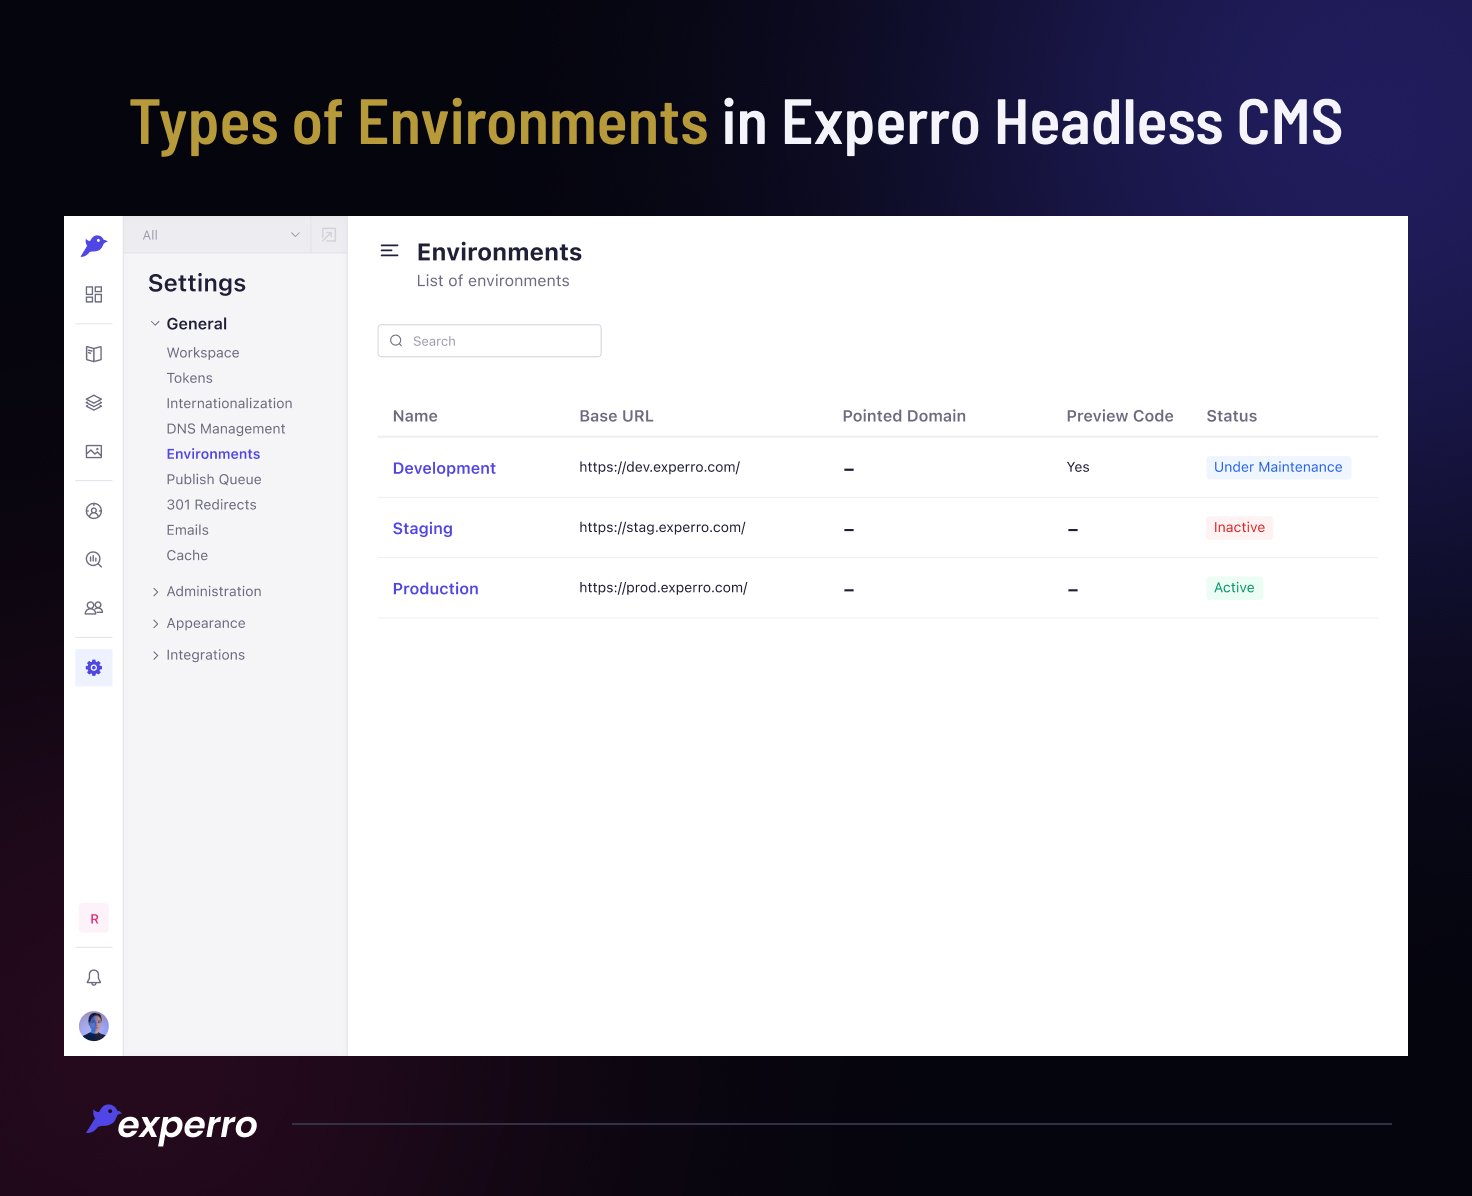 Environments in Experro Headless CMS